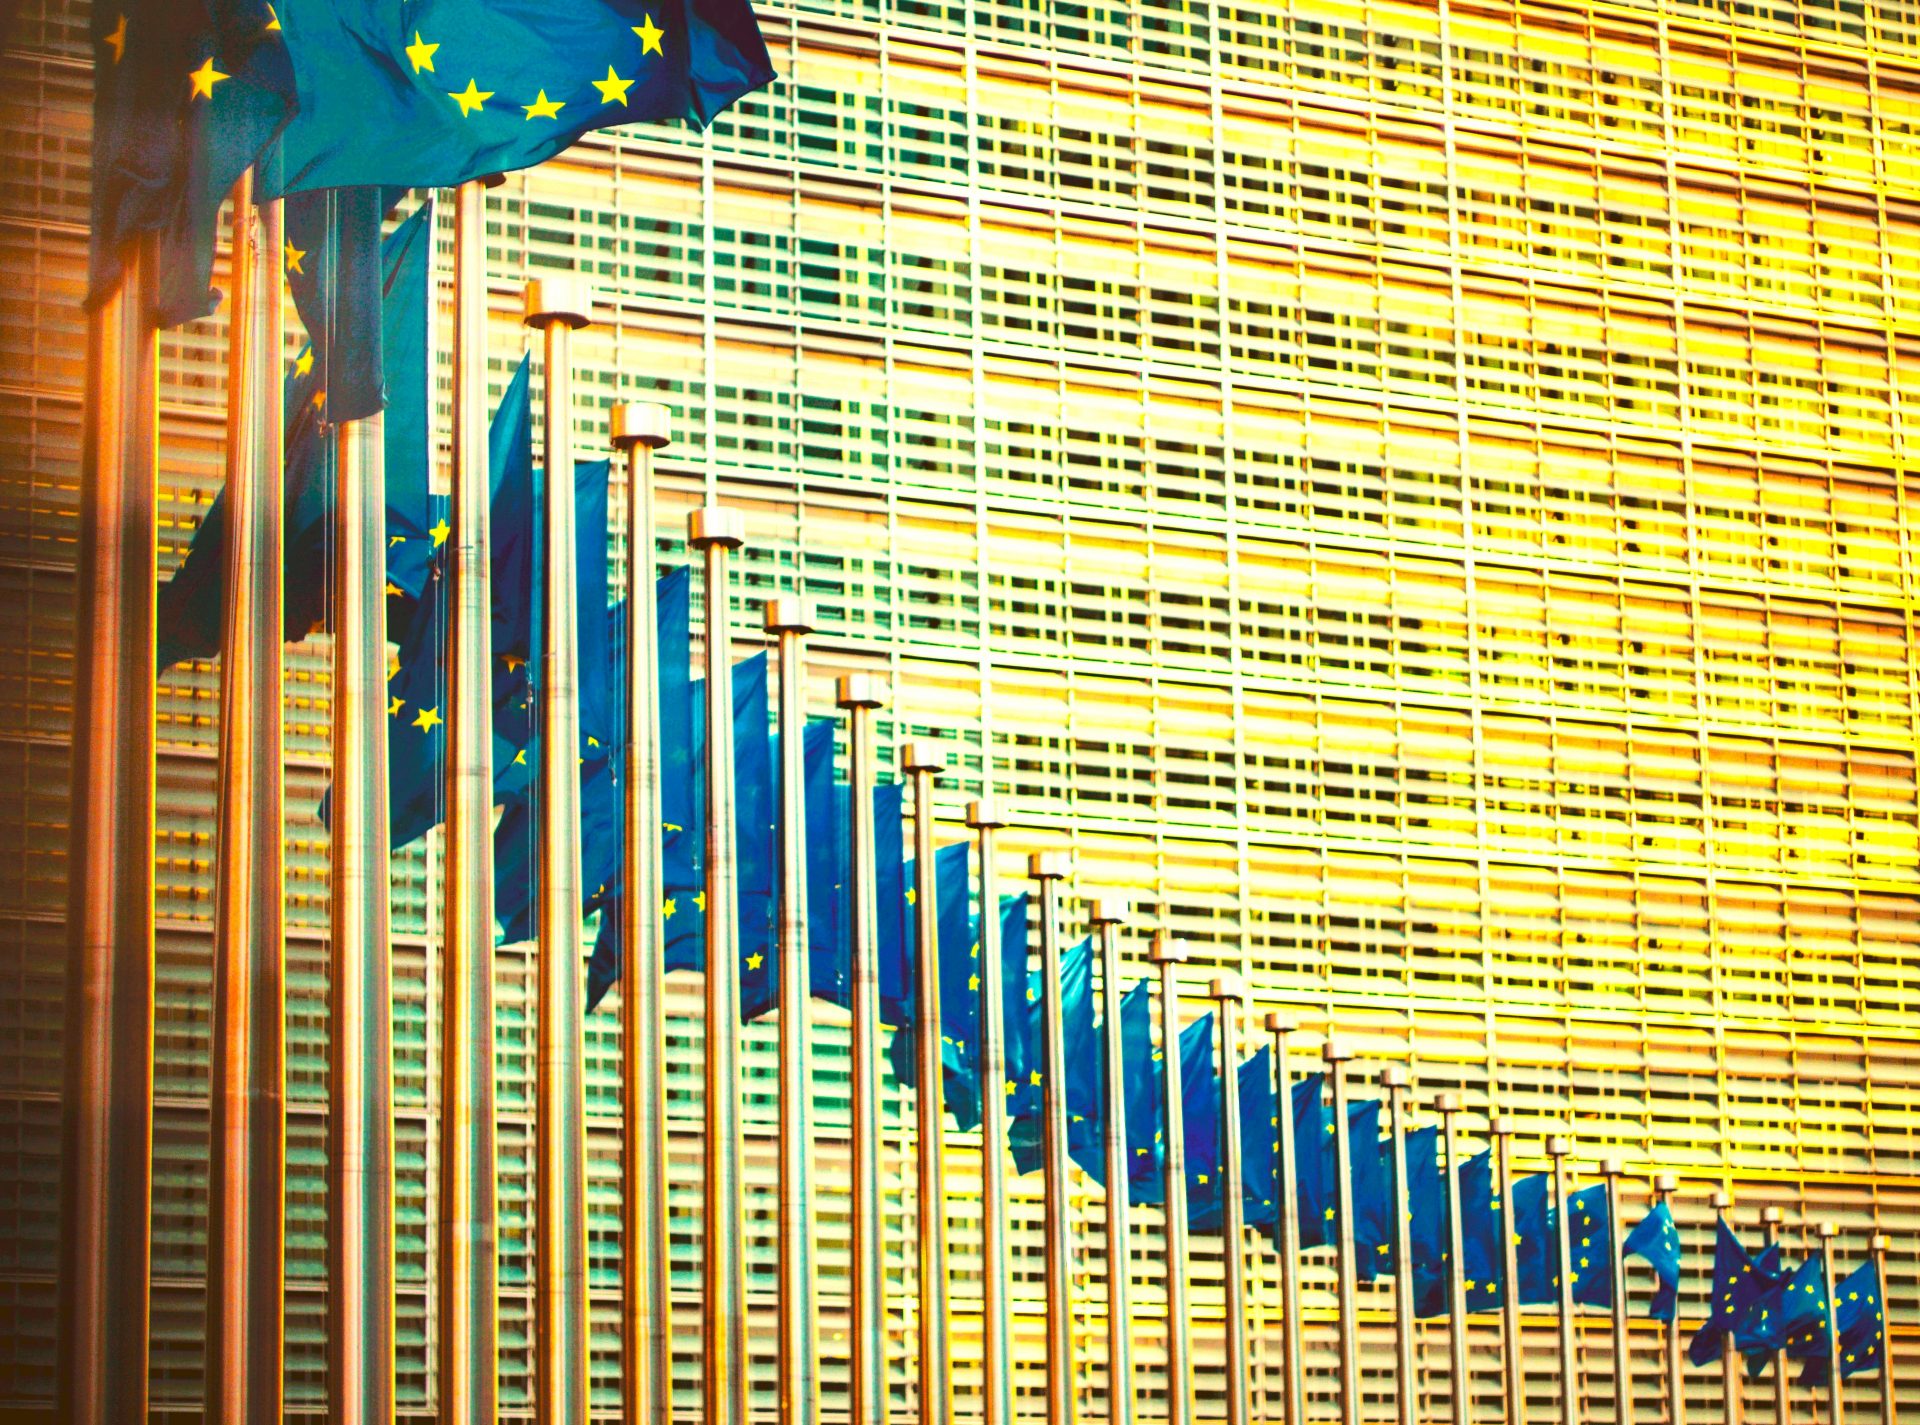 Warm picture of Berlaymont building with multiple hoisted European flags